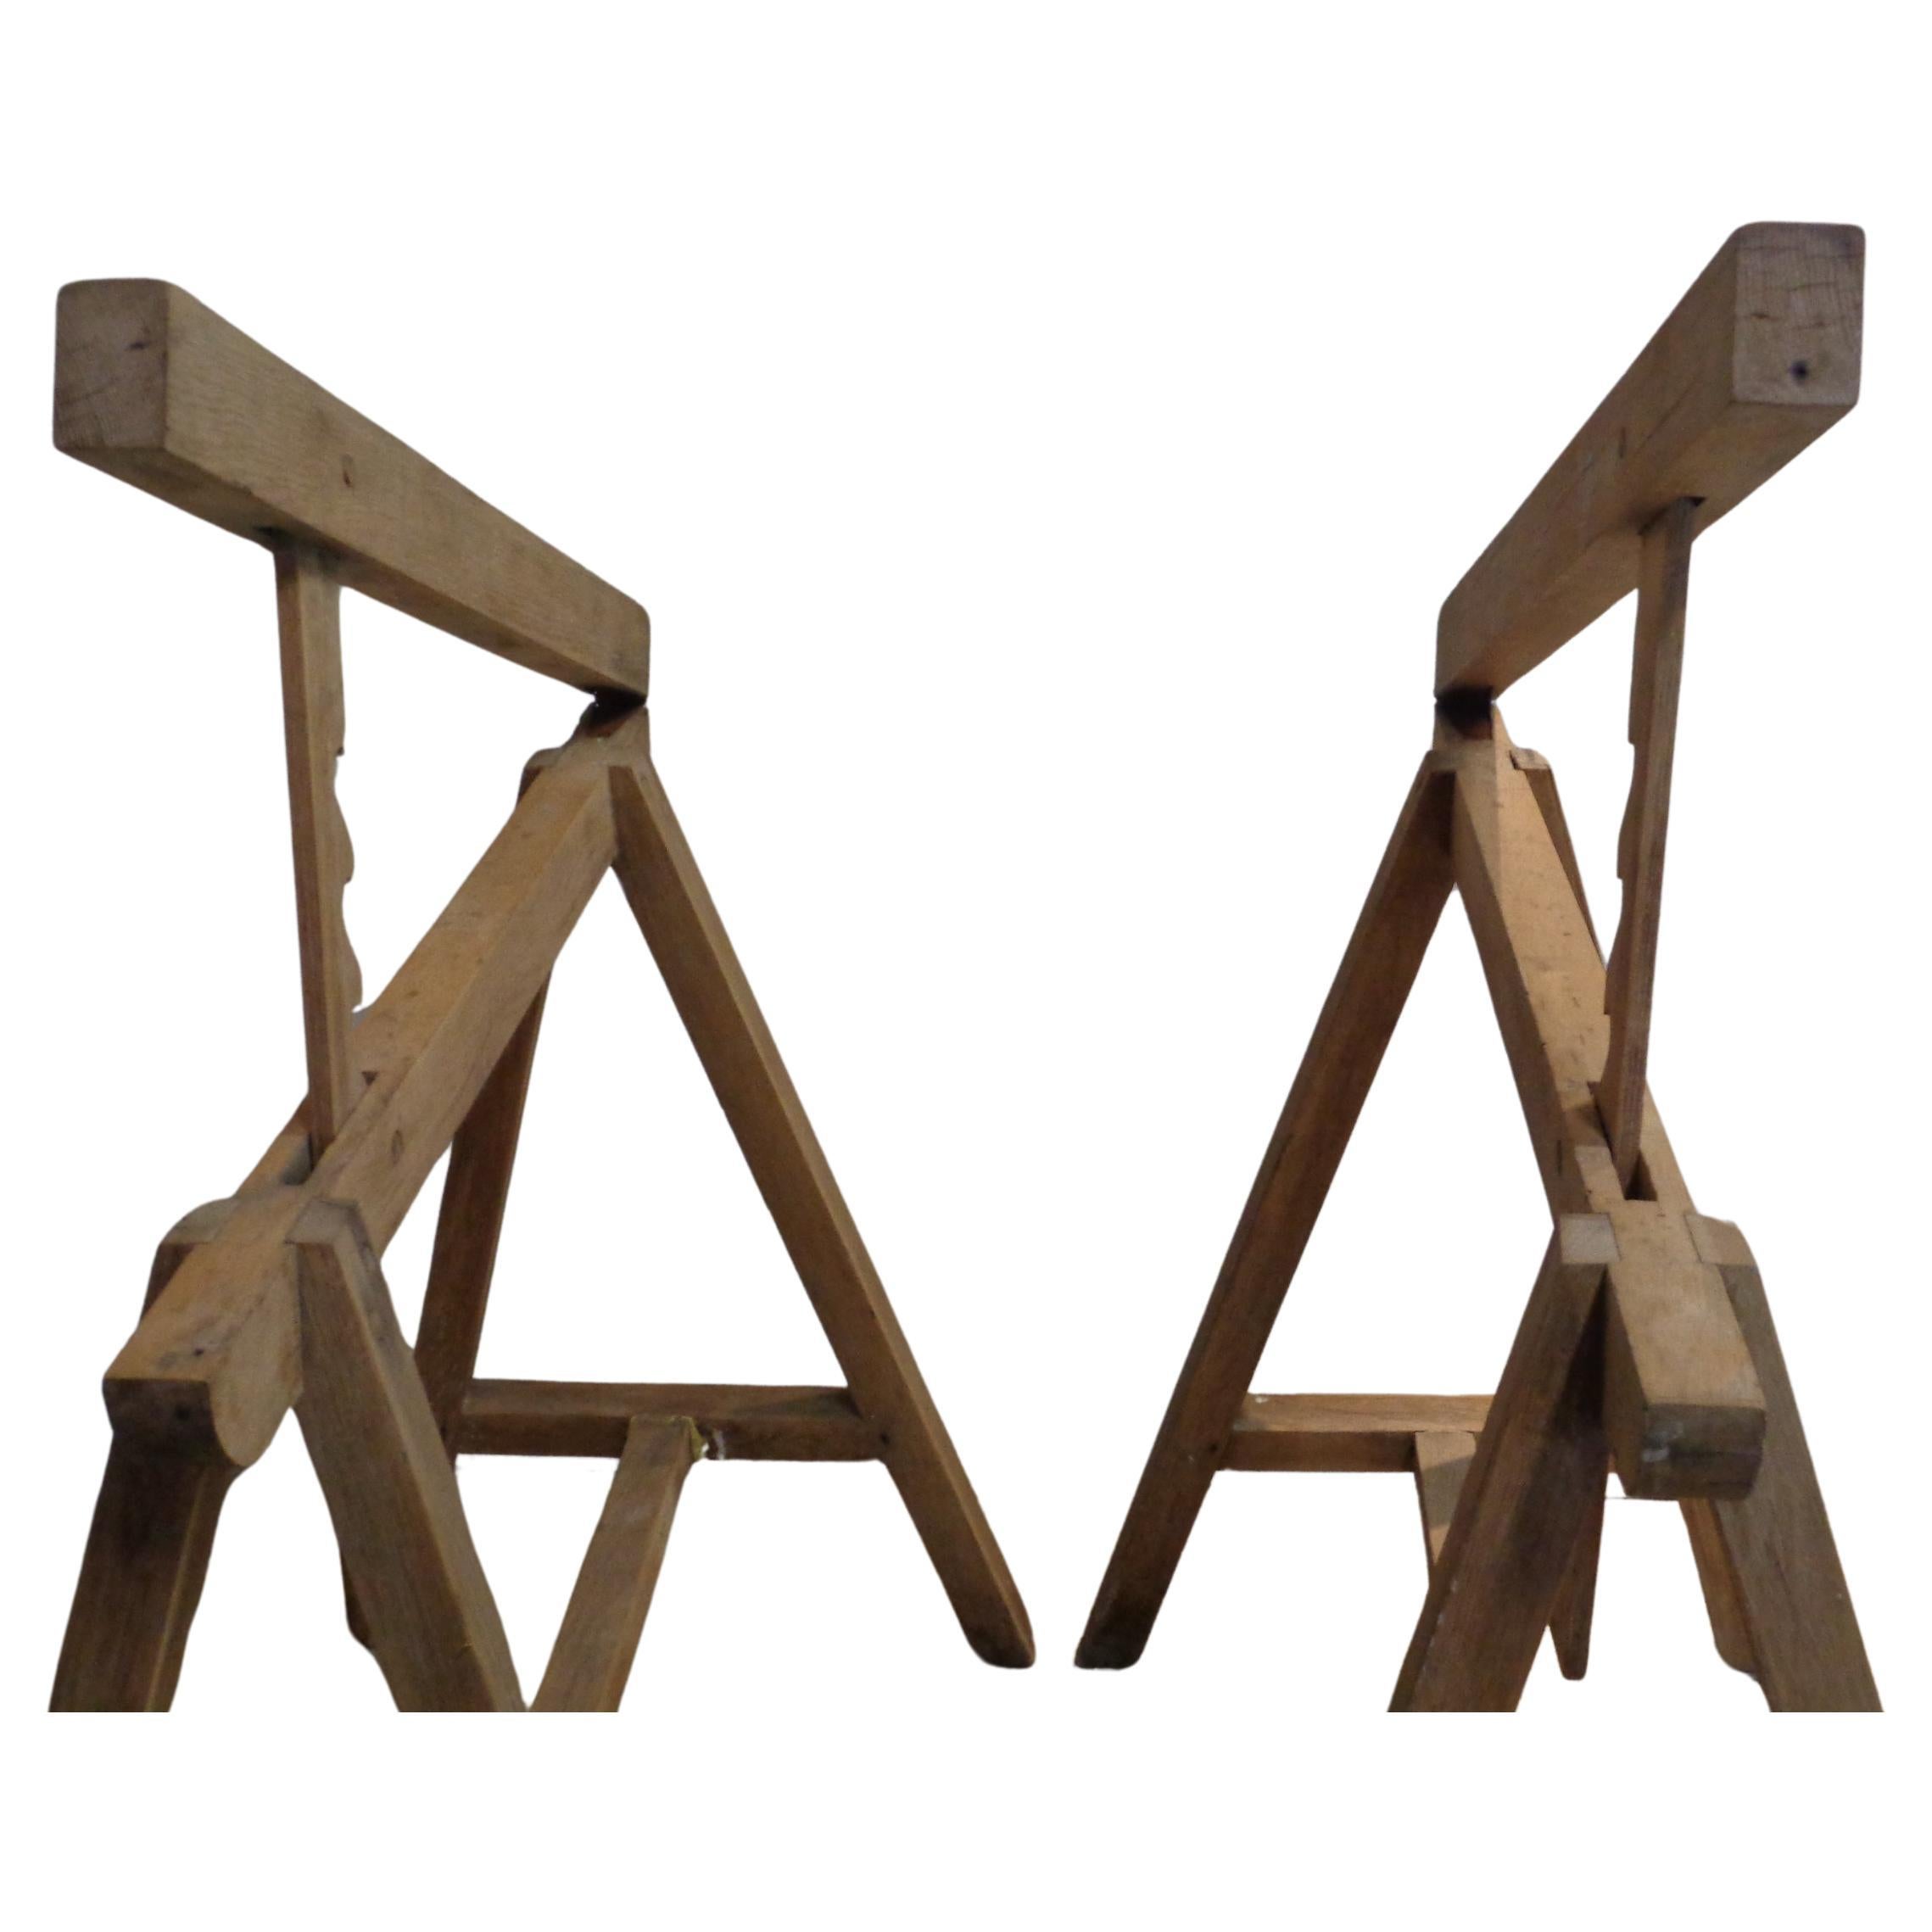 Hand-Crafted Antique Adjustable Sawhorses, Circa 1900 For Sale